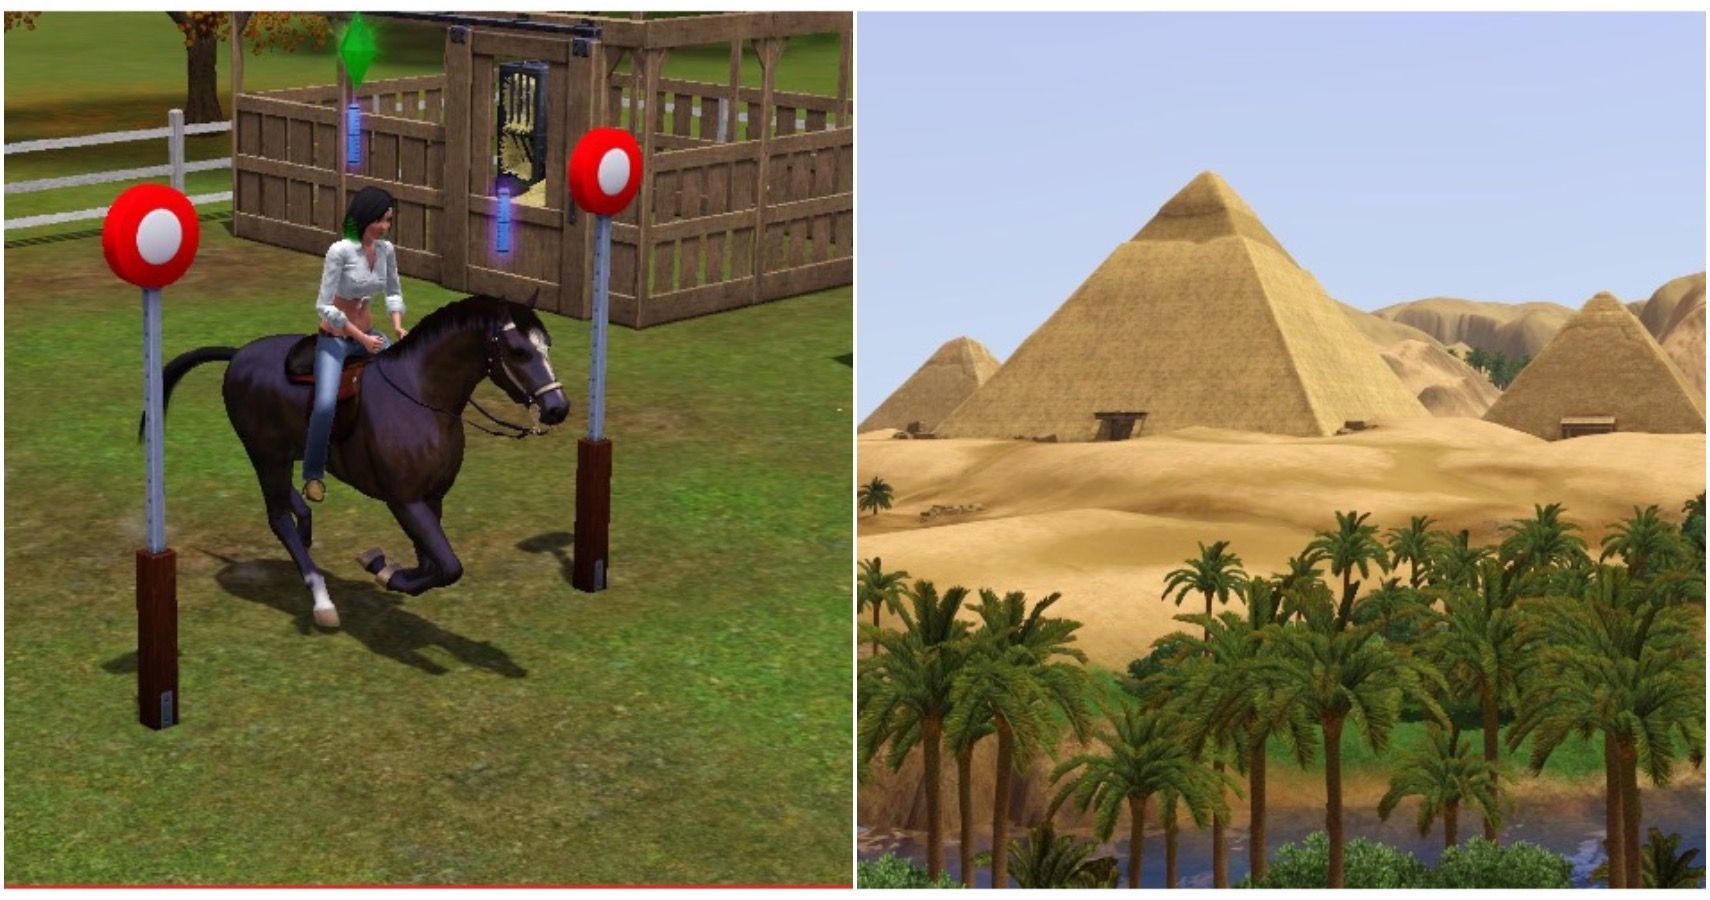 A sim riding on a horse and a view of Al Simhara in Sims 3